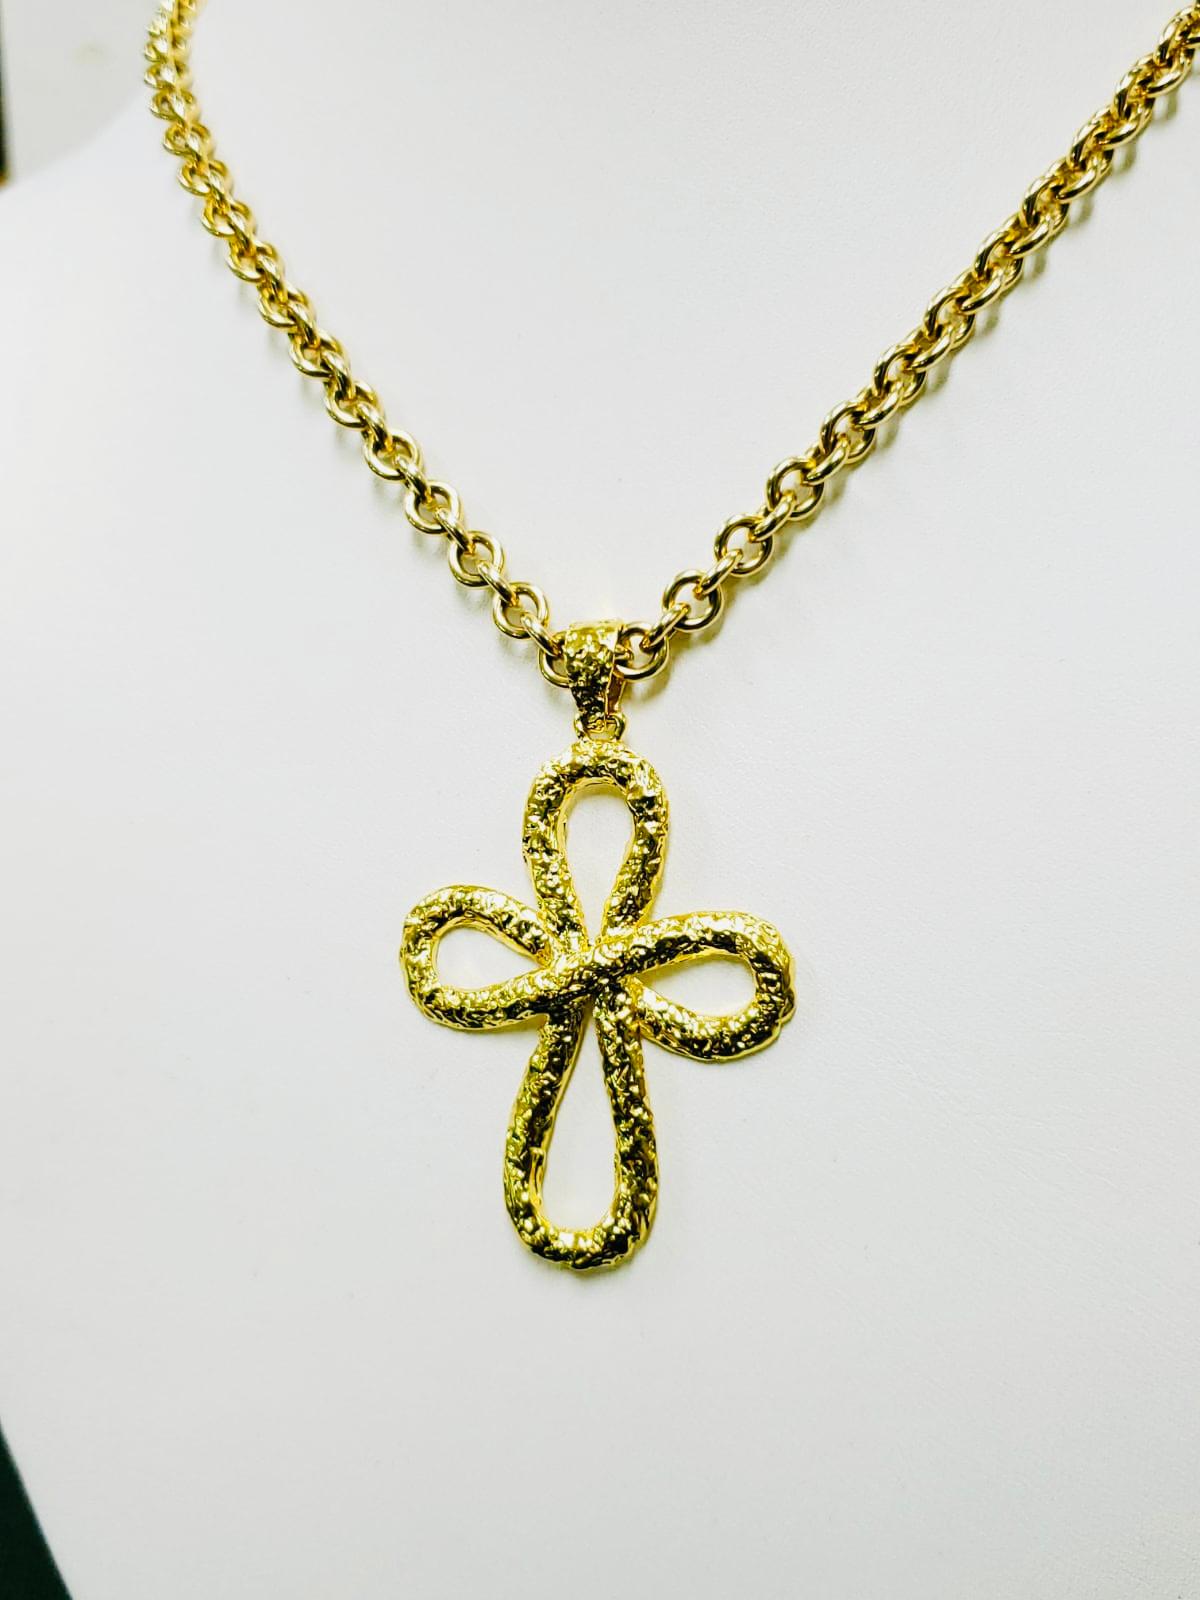 22k Gold Infinity Cross Pendant Necklace For Sale 1